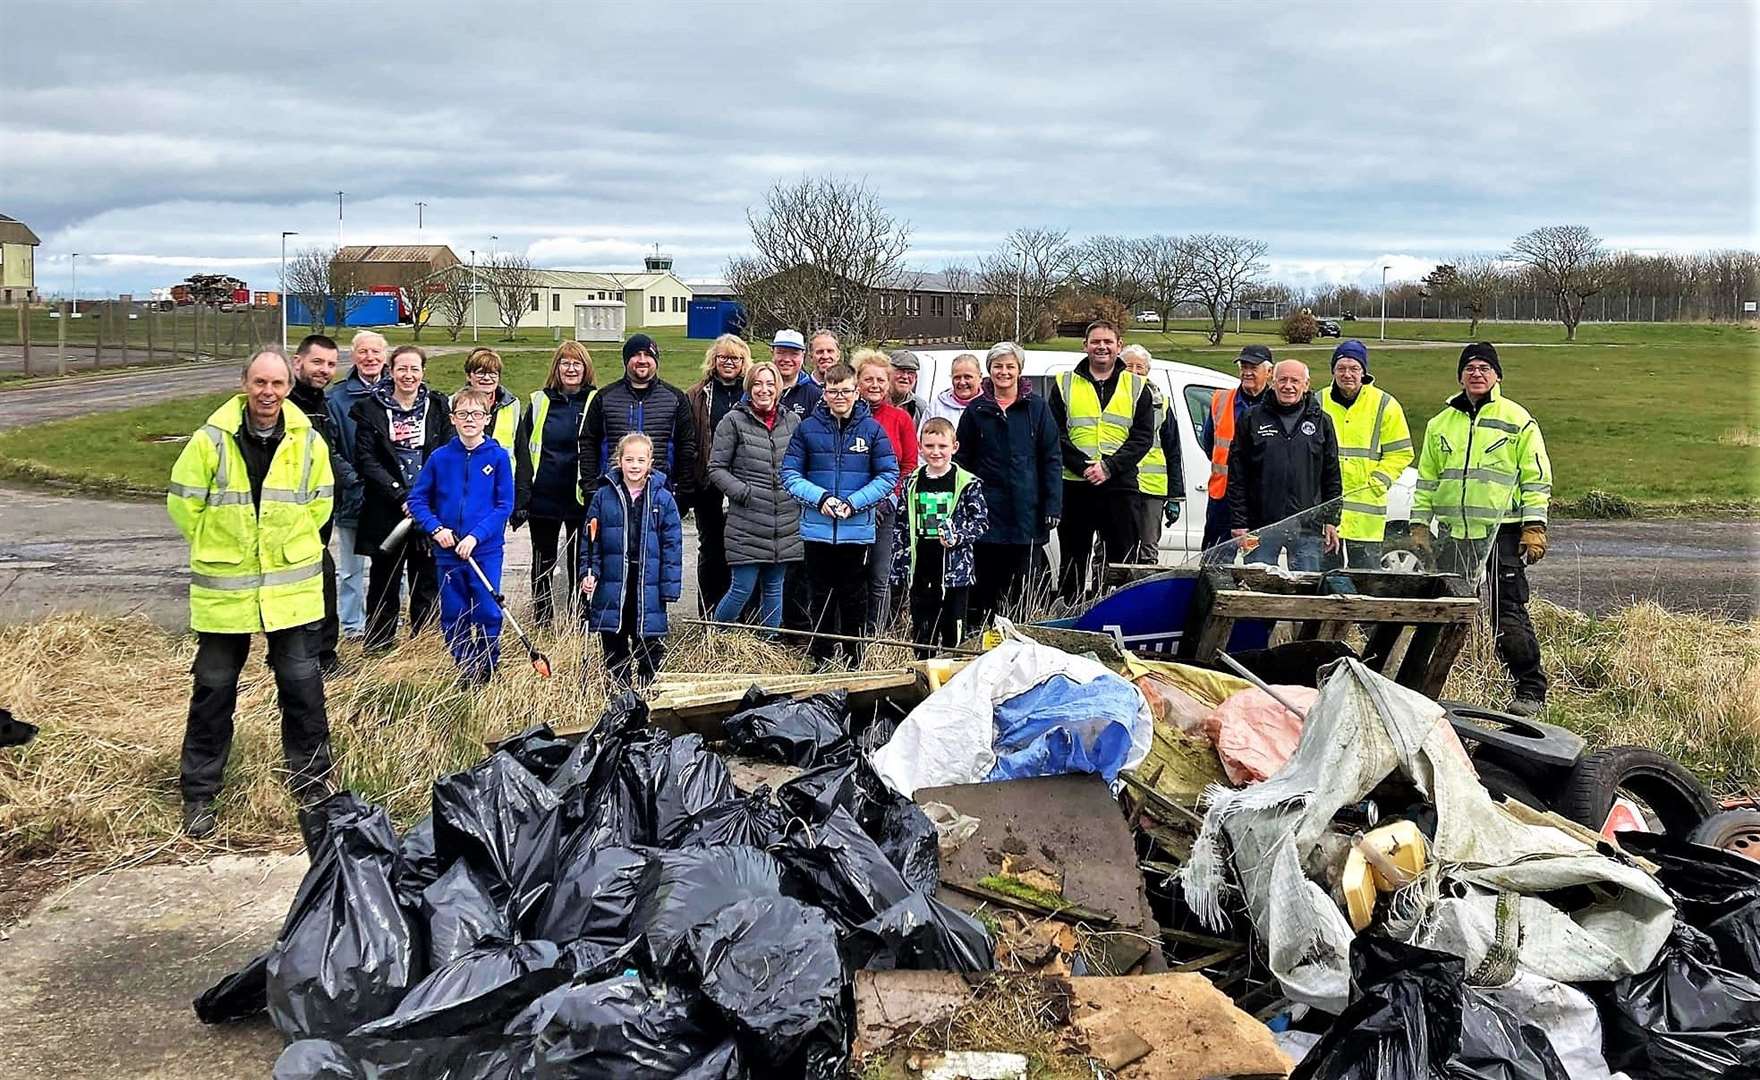 One of the spring clean event around Wick's industrial estate at the airport amassed this huge amount of rubbish. Over 30 volunteers turned out to help with this one alone.